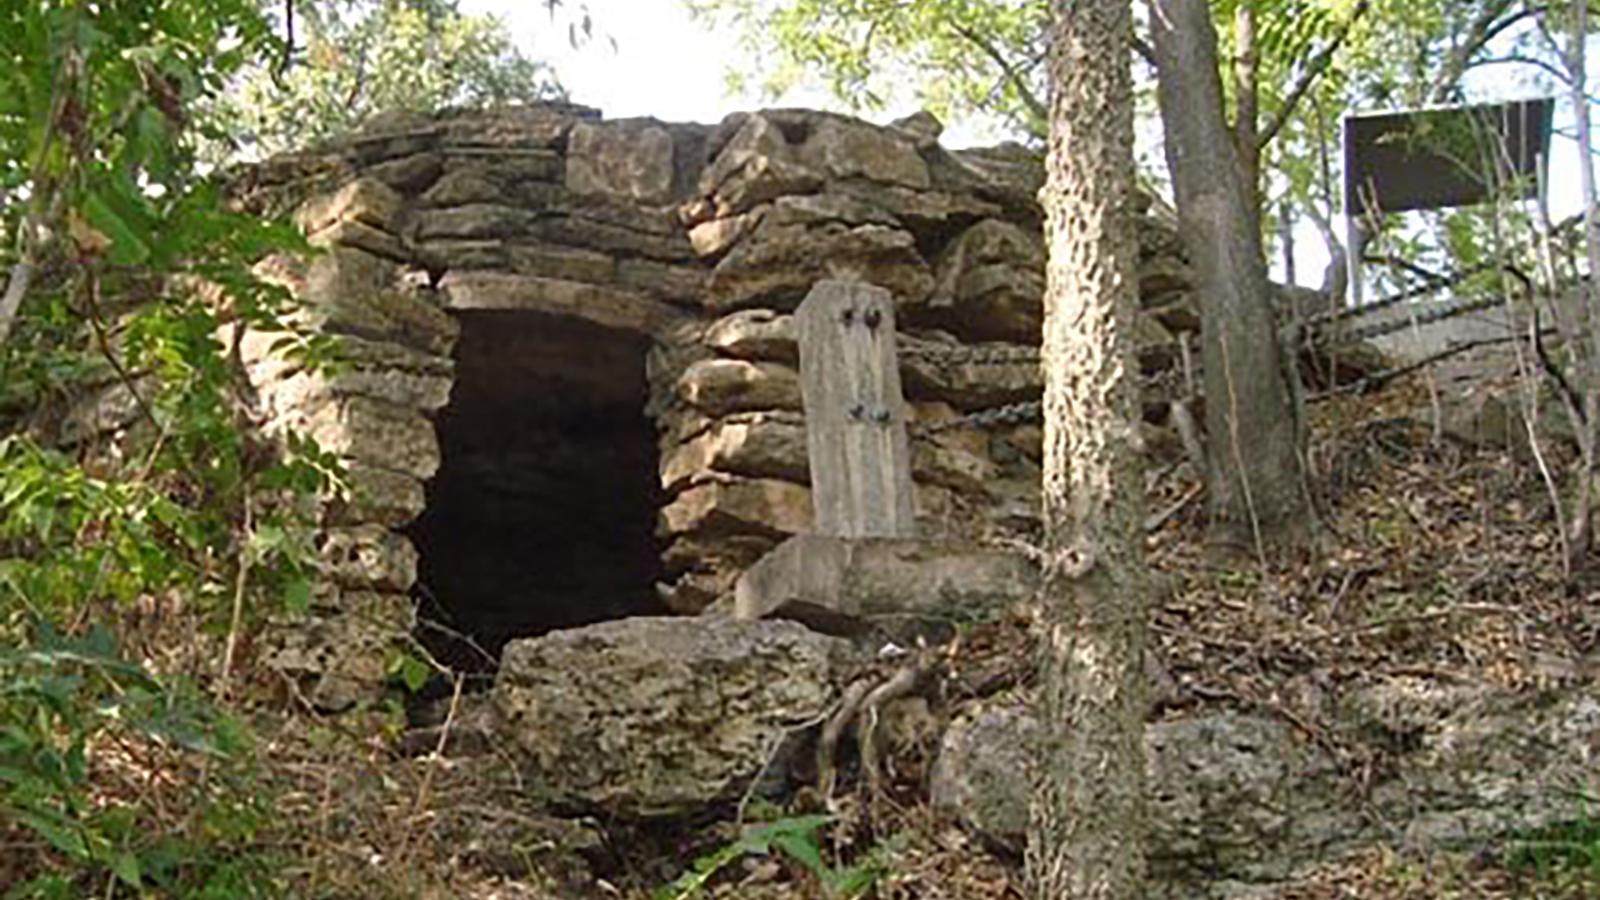 A crude stone fort in a forest.